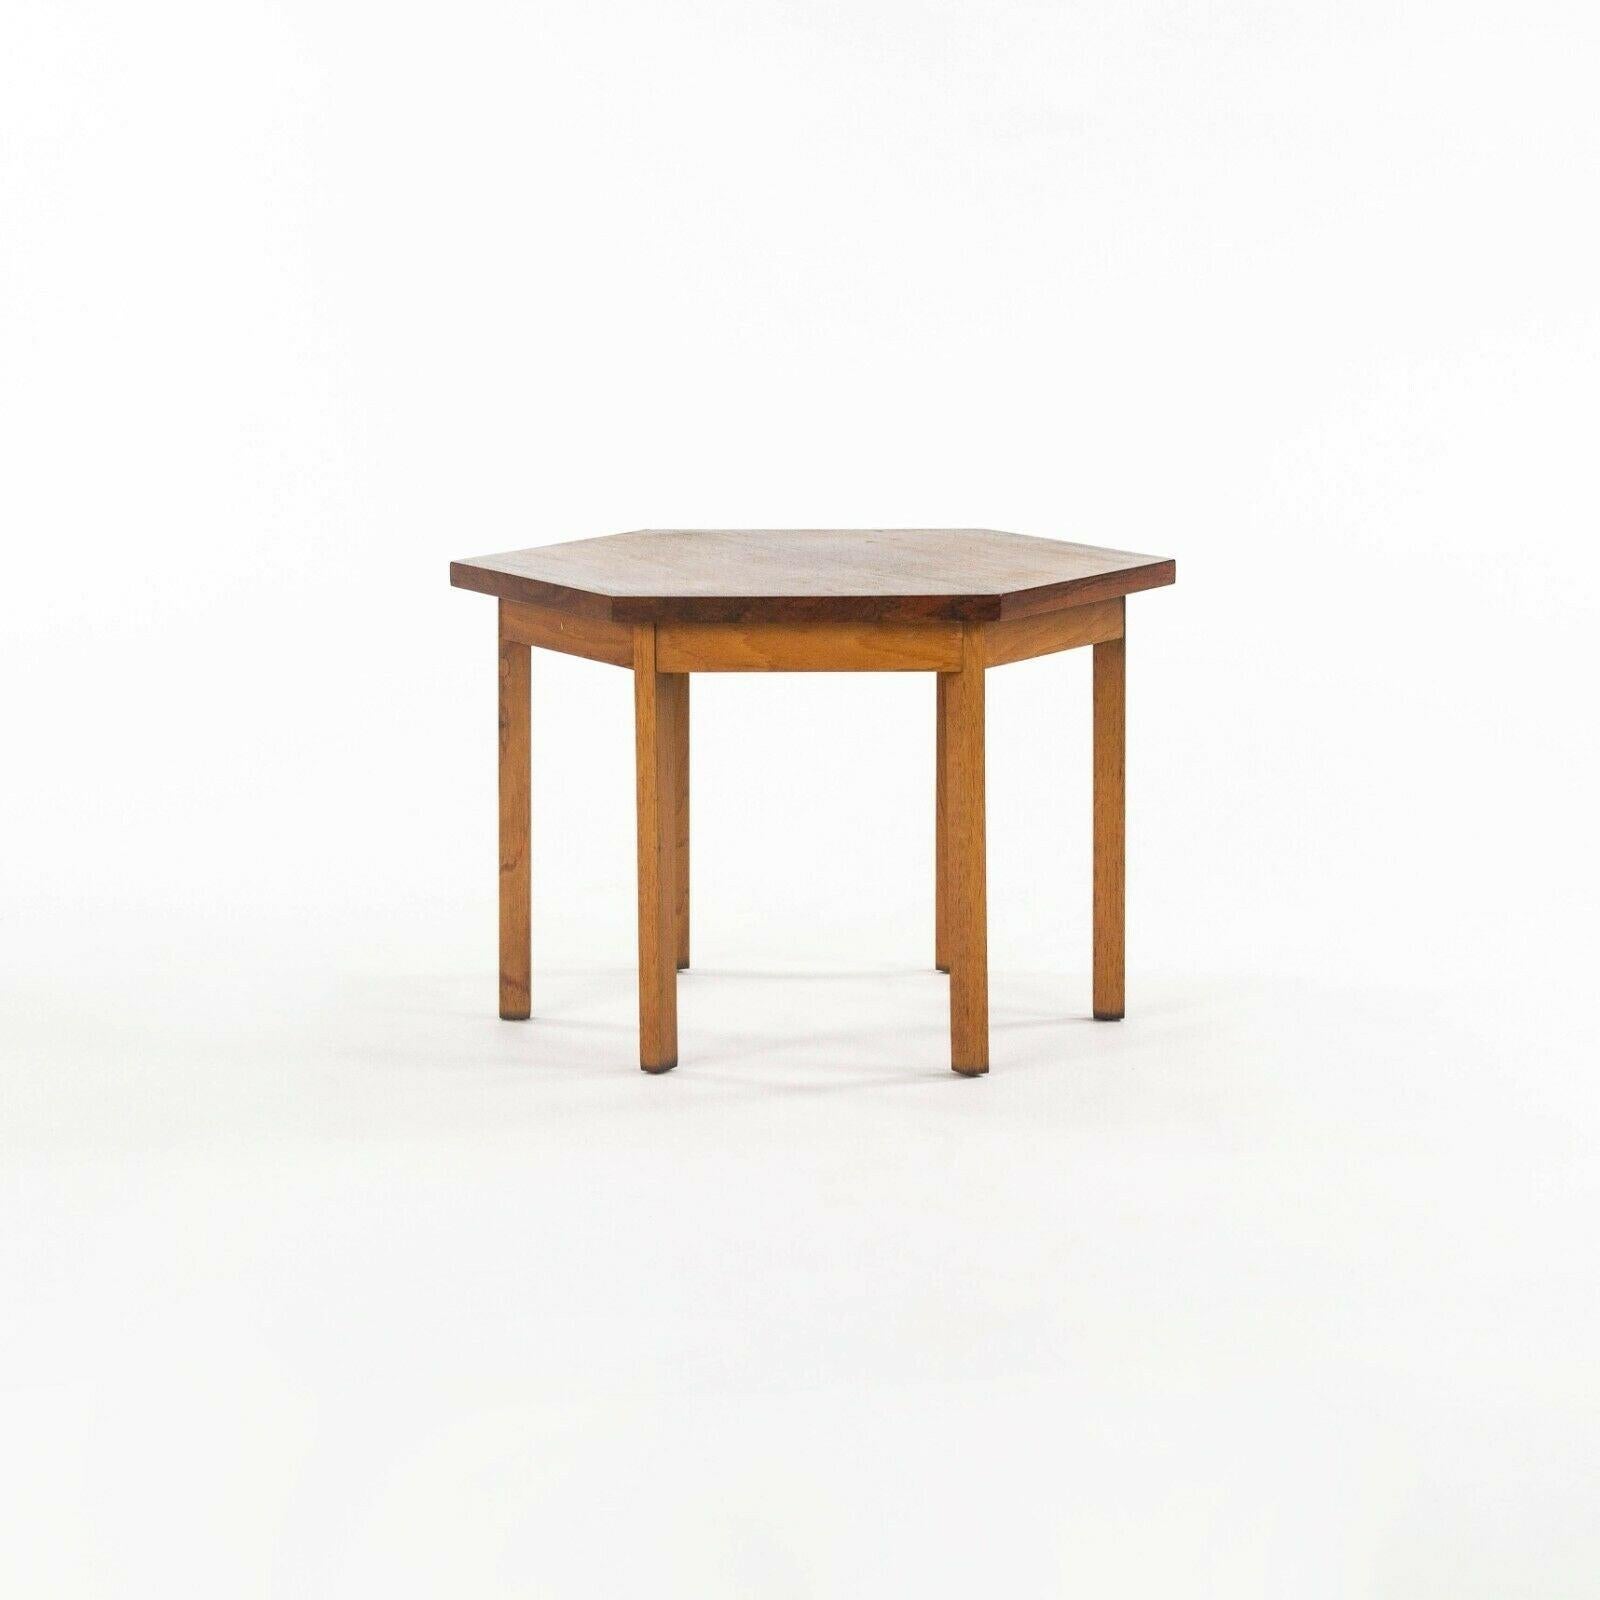 Listed for sale is a gorgeous pair of Delineator Group occasional tables (side tables), model 995-86, designed by Paul Mccobb and produced by Lane. These are rare examples from circa 1961. The pair was specified in rosewood, accompanied by walnut